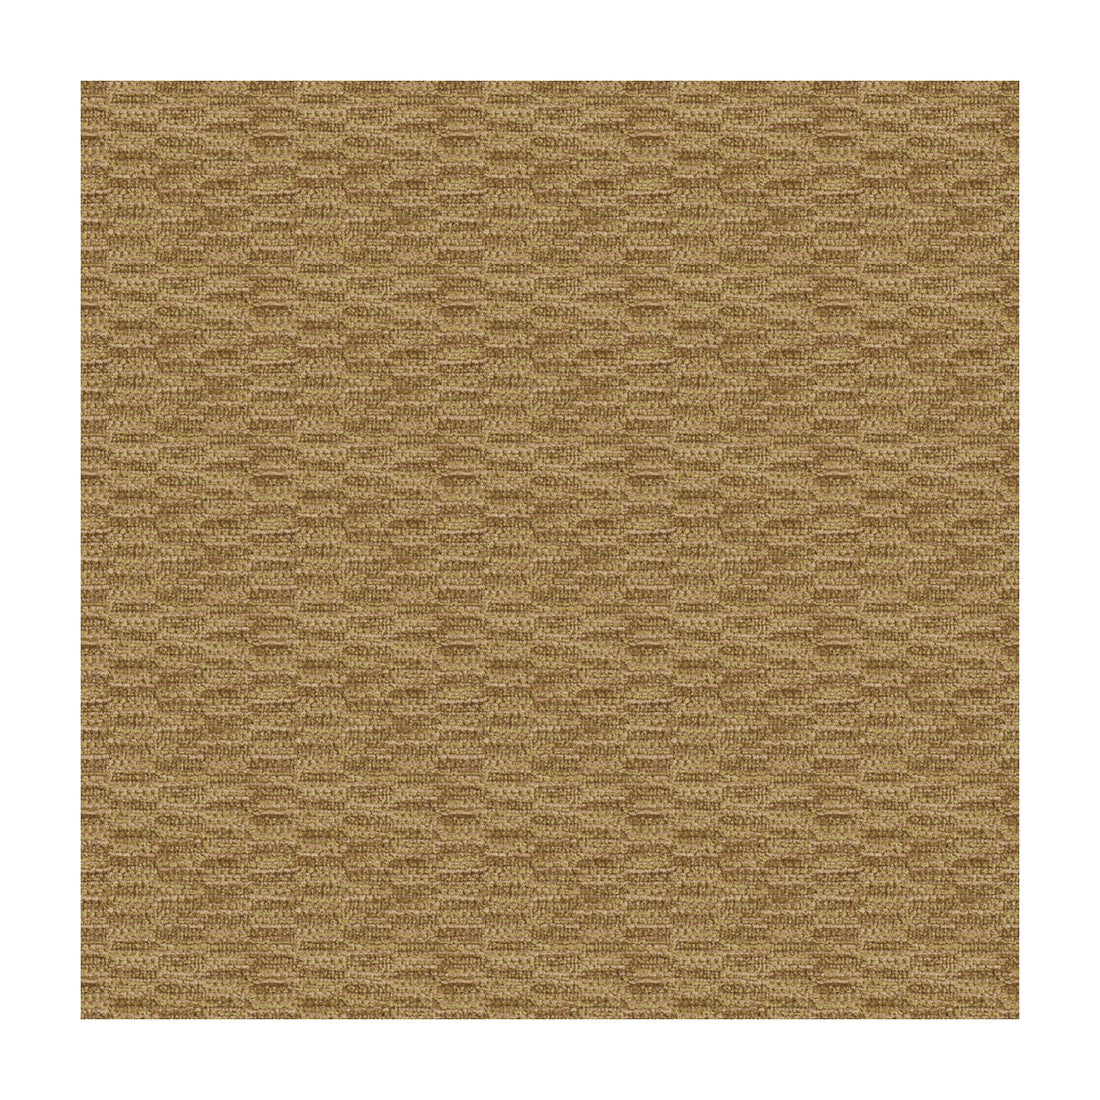 Barclay Texture fabric in fawn color - pattern BR-800042.812.0 - by Brunschwig &amp; Fils